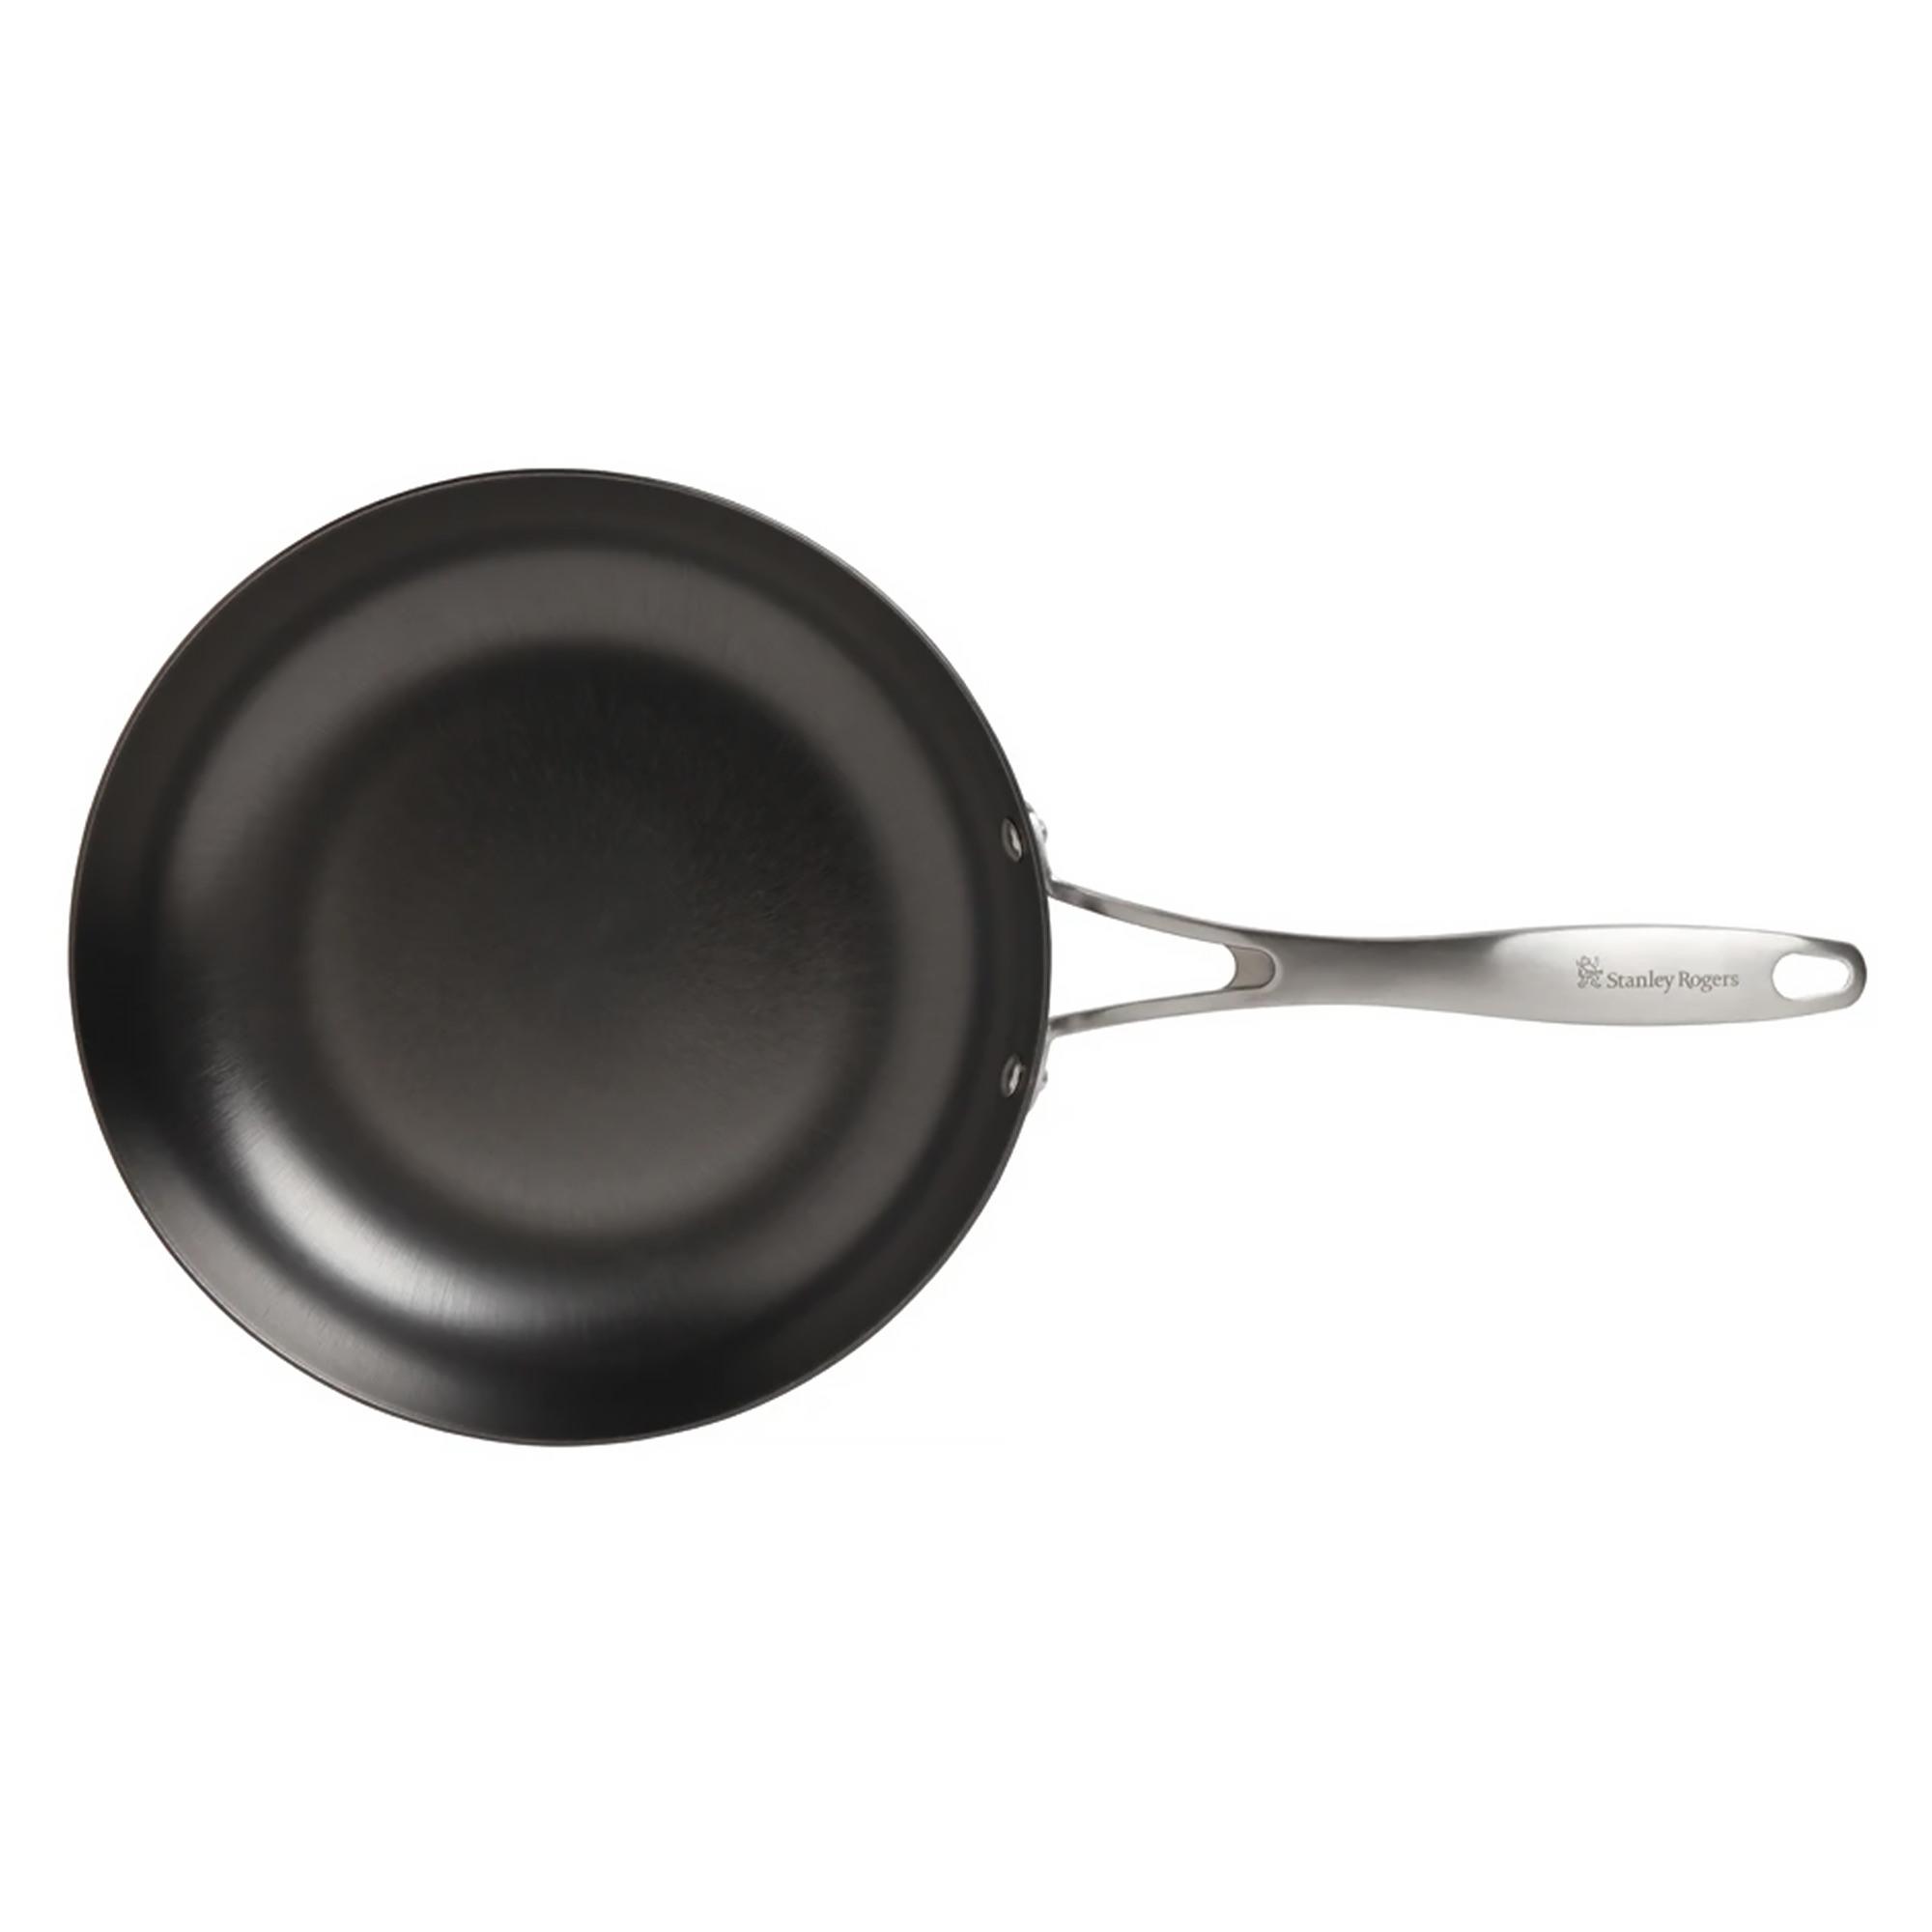 Stanley Rogers Lightweight Cast Iron Frypan 28cm Image 3